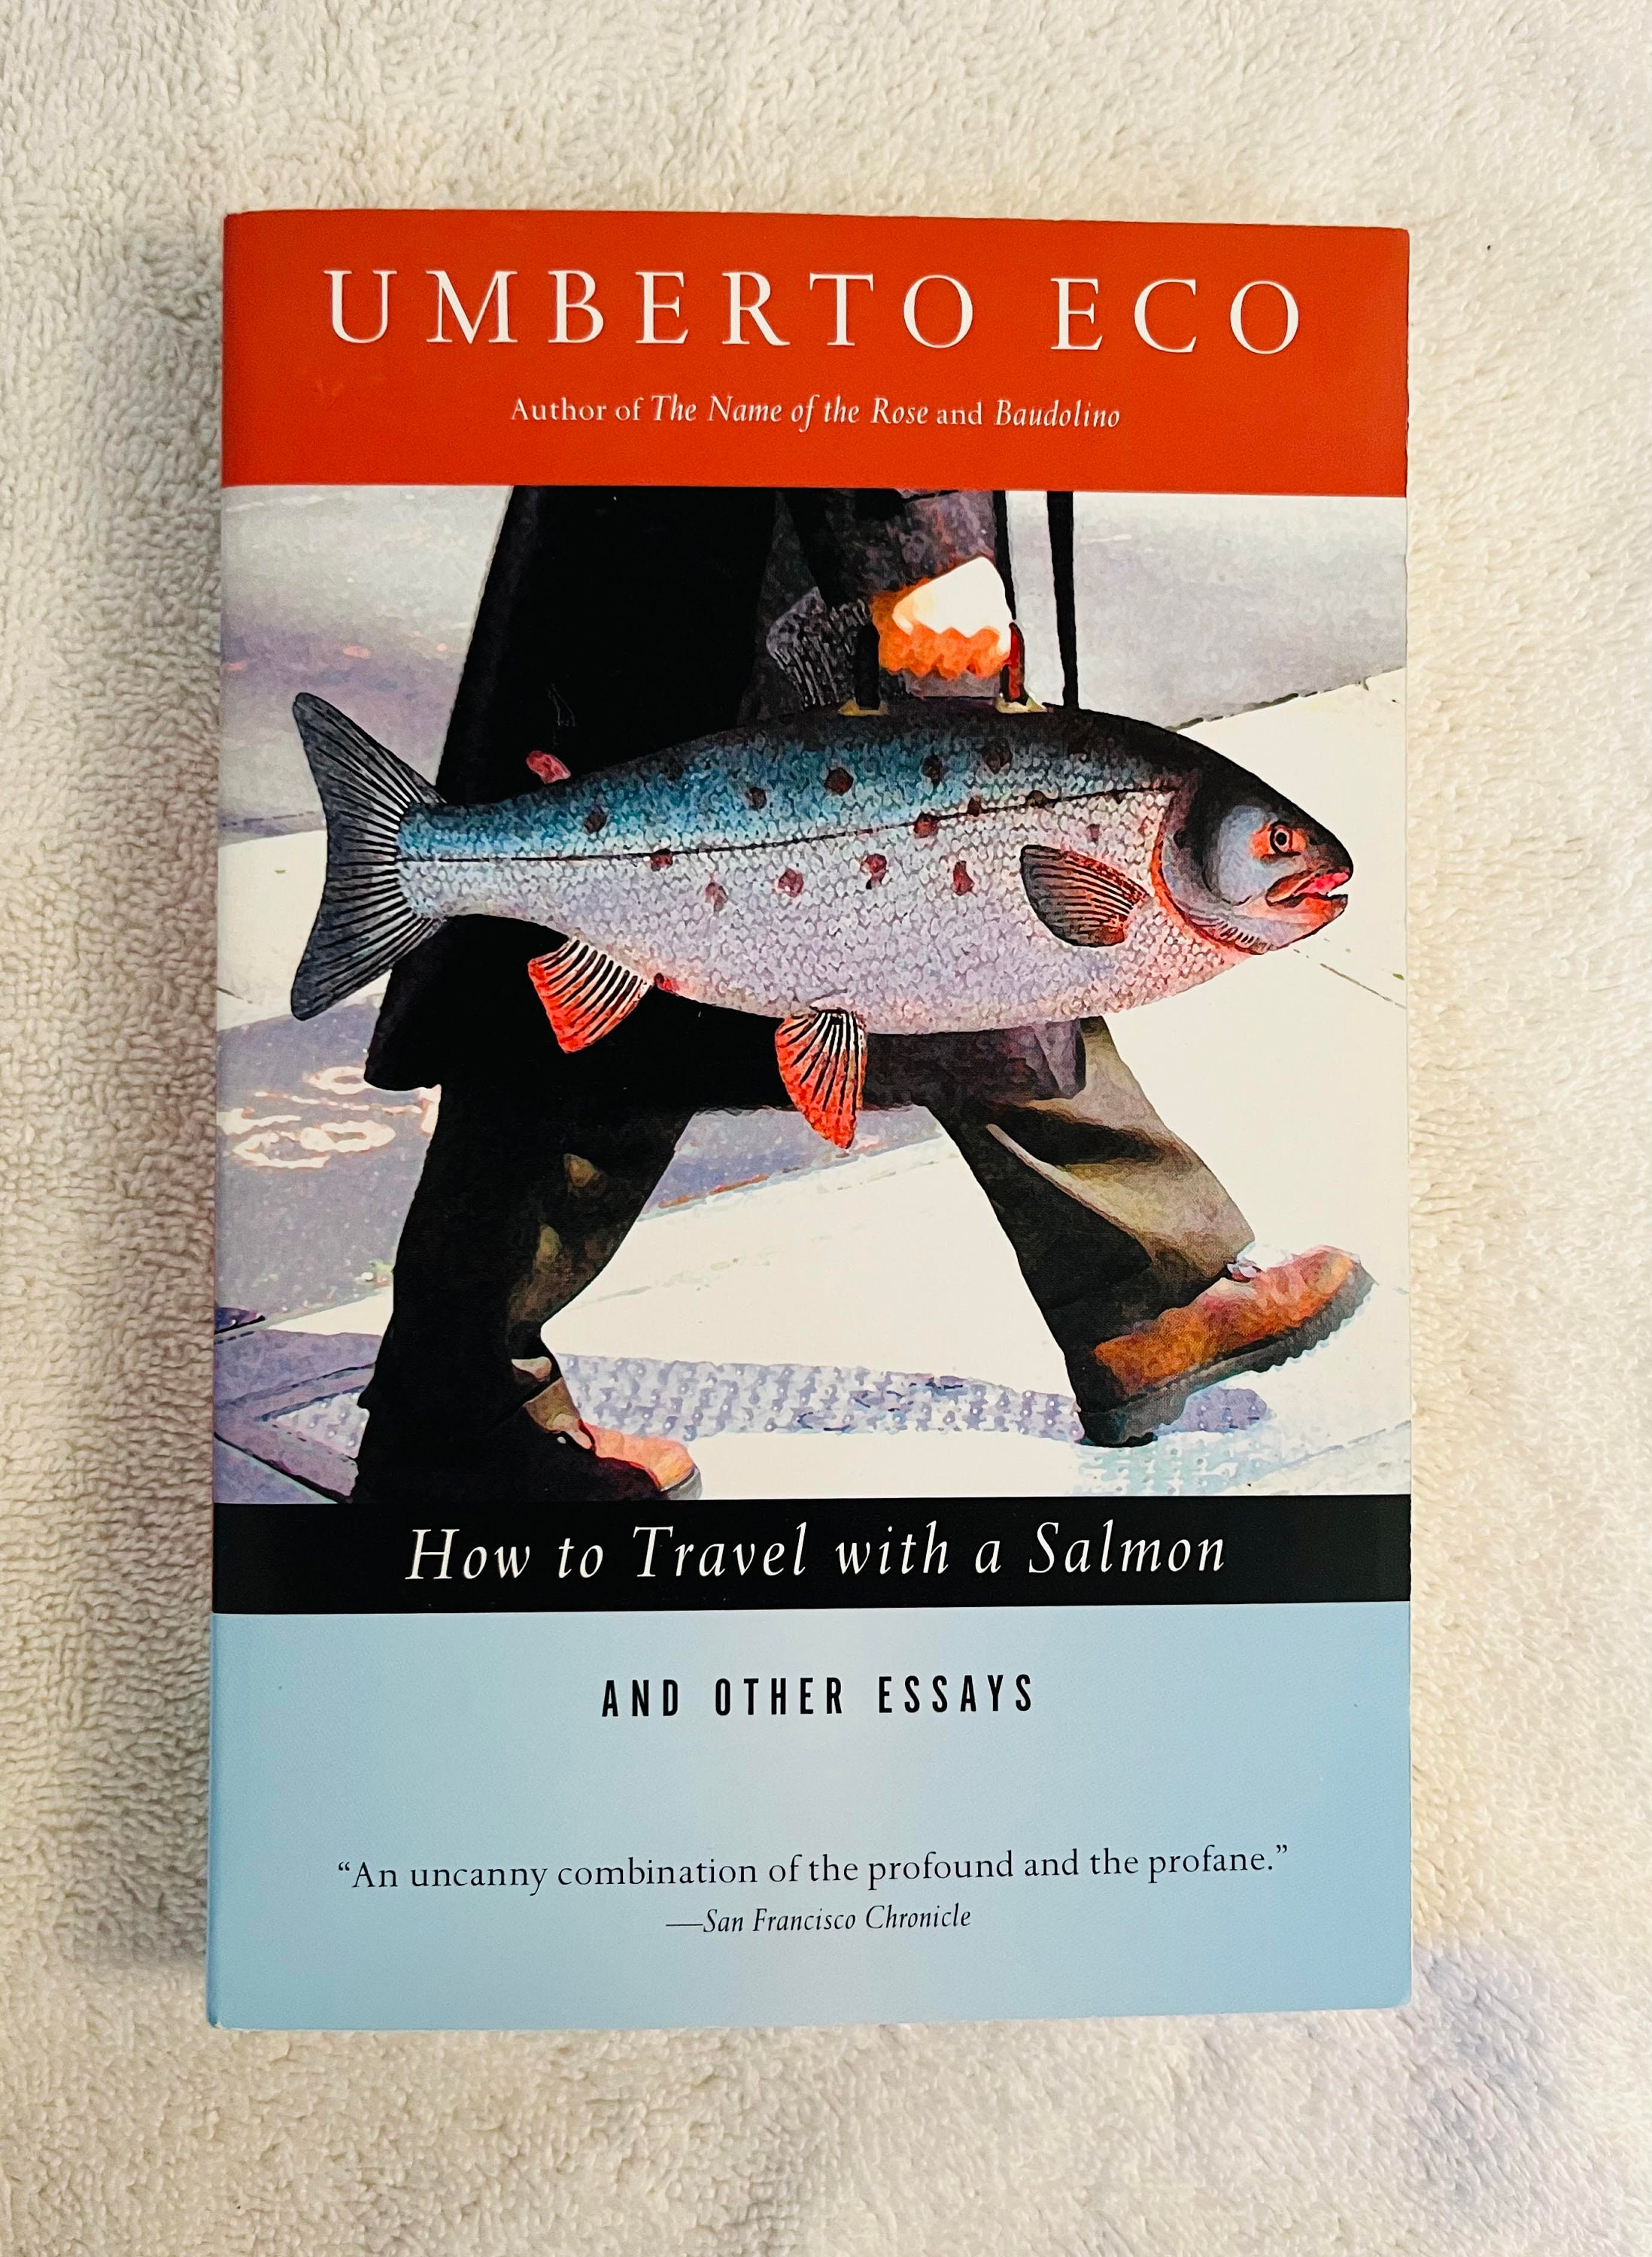 UMBERTO ECO How to Travel With a Salmon and Other Essays 1995 Soft